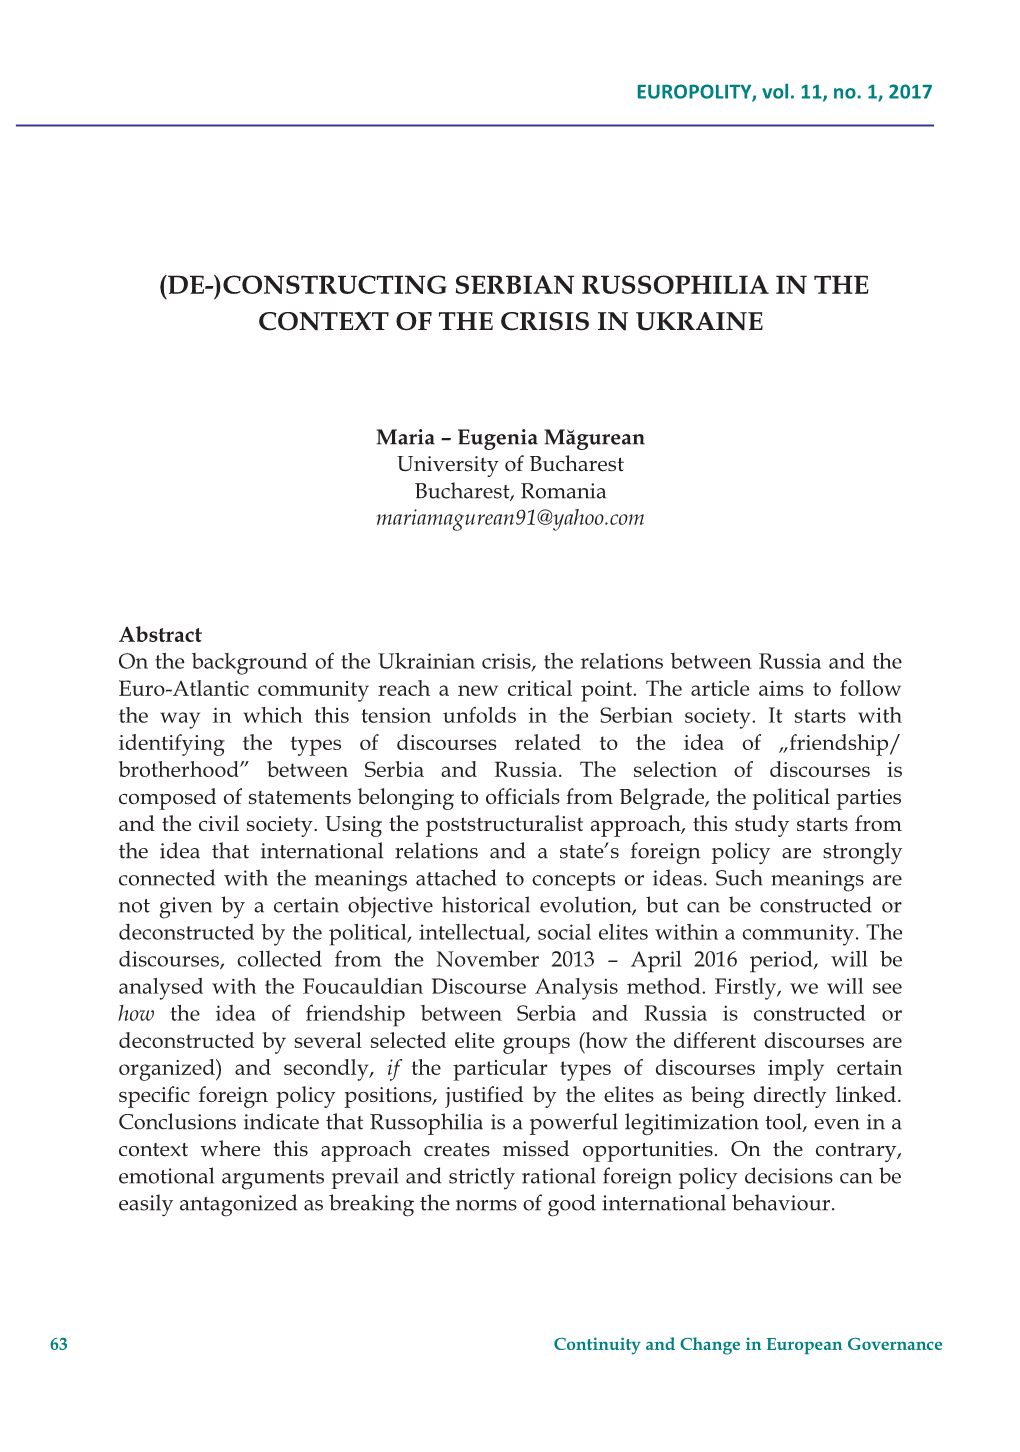 Constructing Serbian Russophilia in the Context of the Crisis in Ukraine